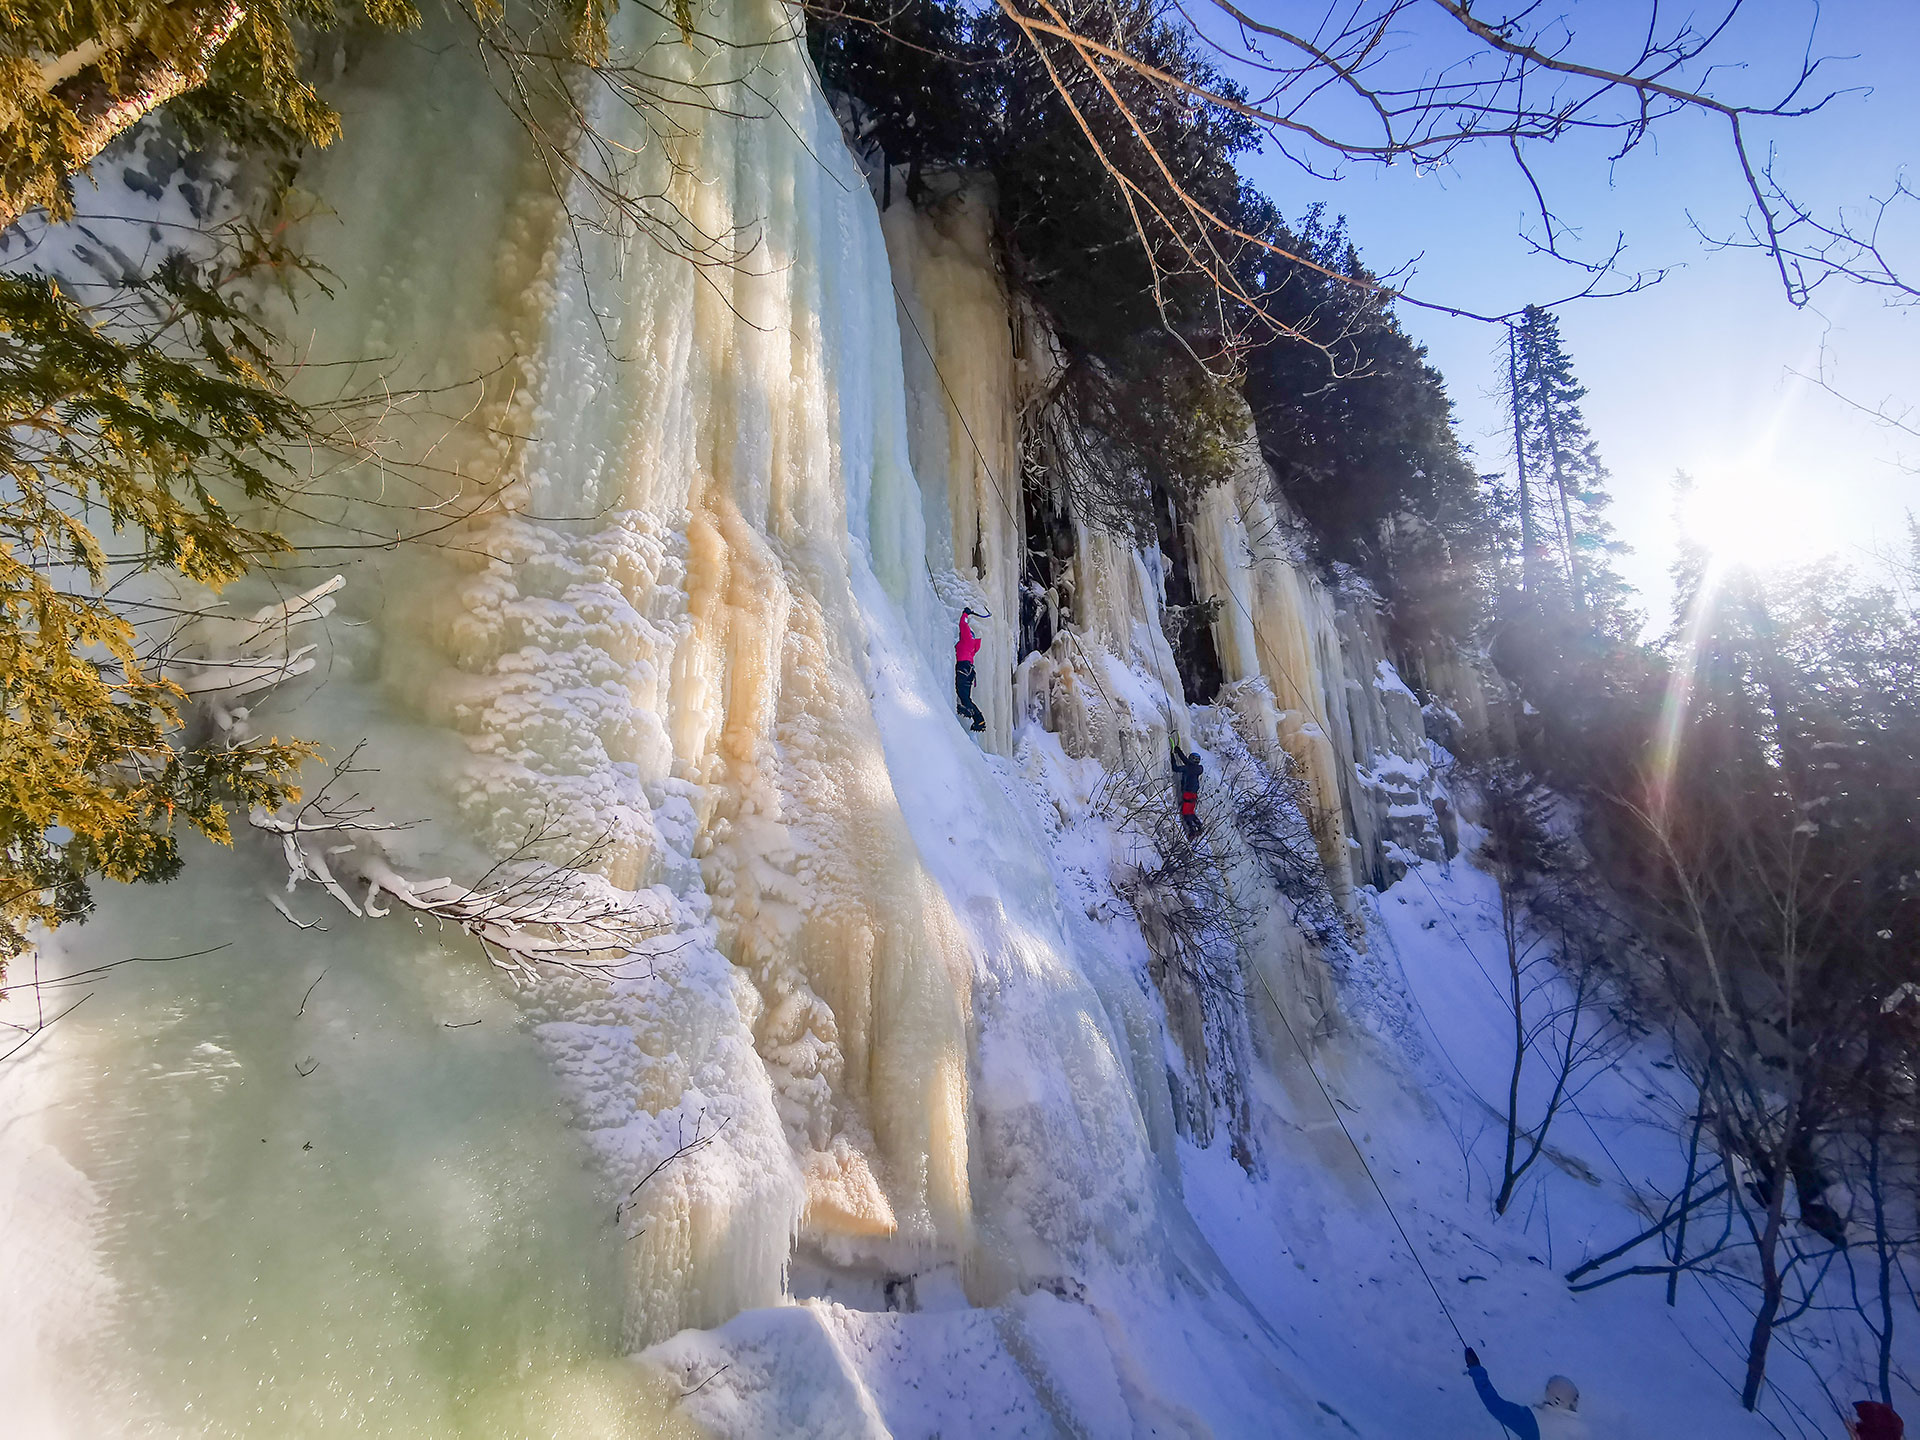 person climbs an ice waterfall in winter